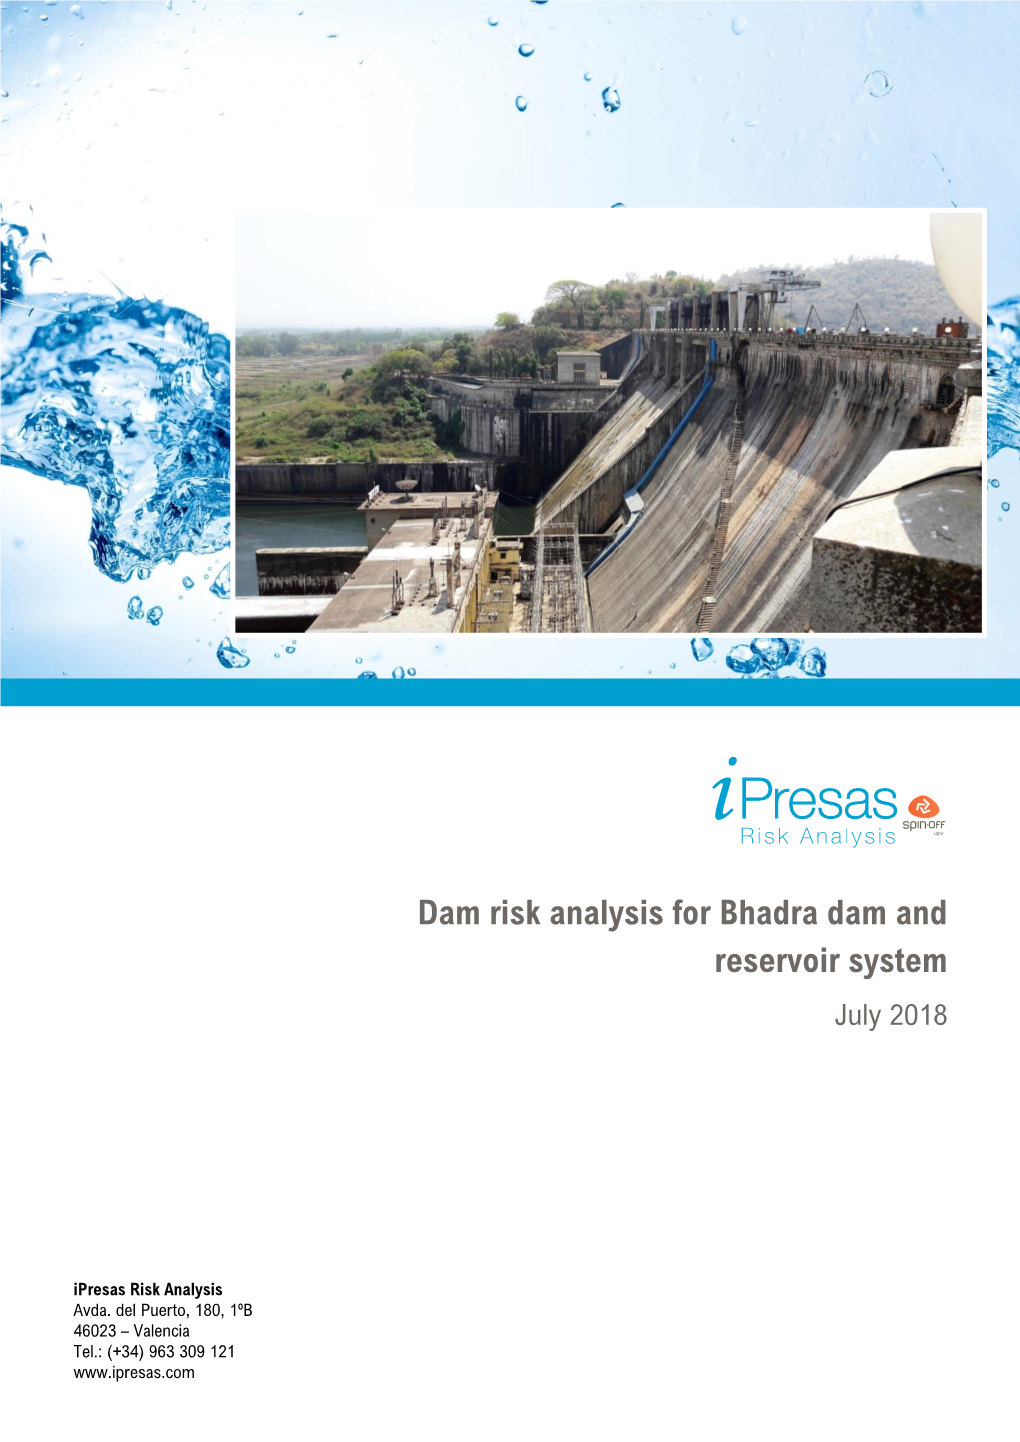 Dam Risk Analysis for Bhadra Dam and Reservoir System July 2018